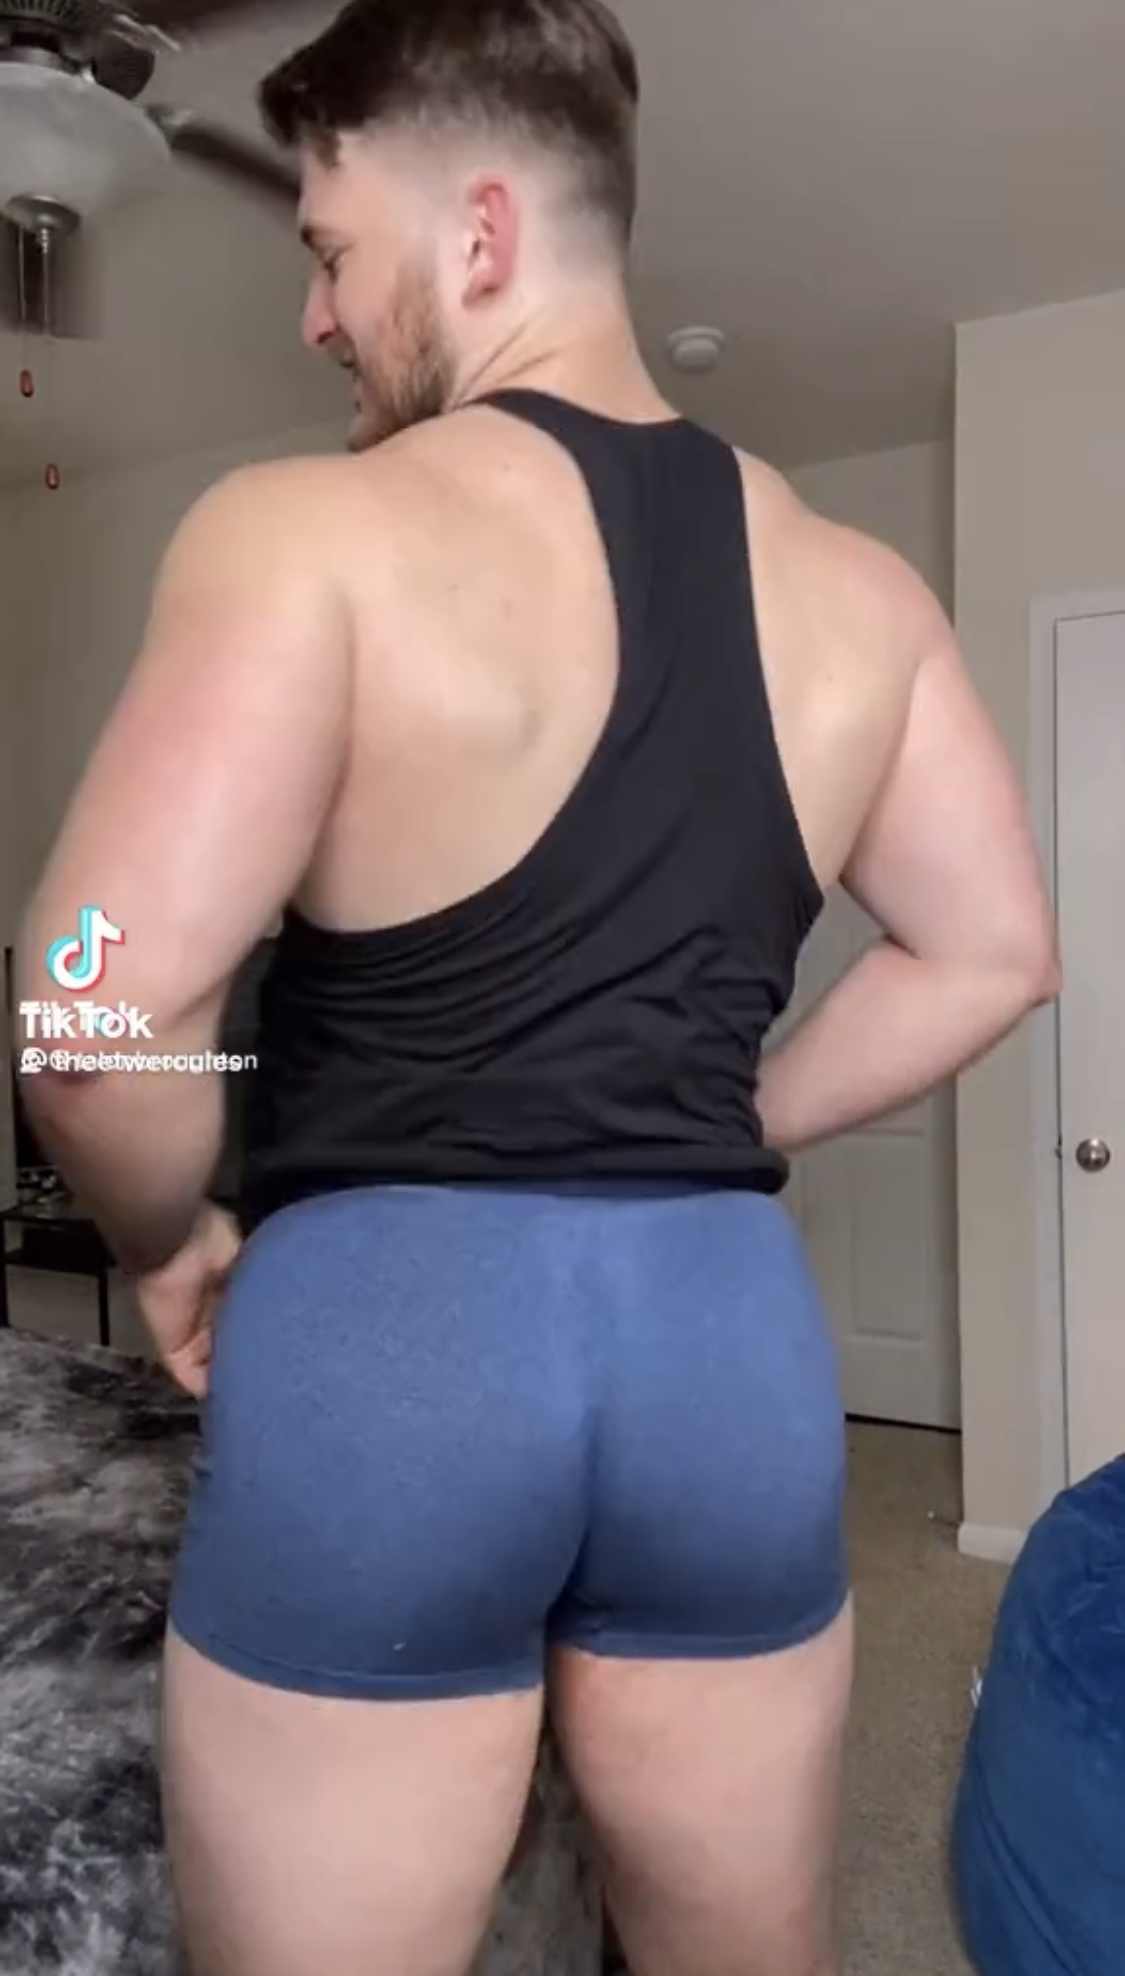 Damn hes Thicc